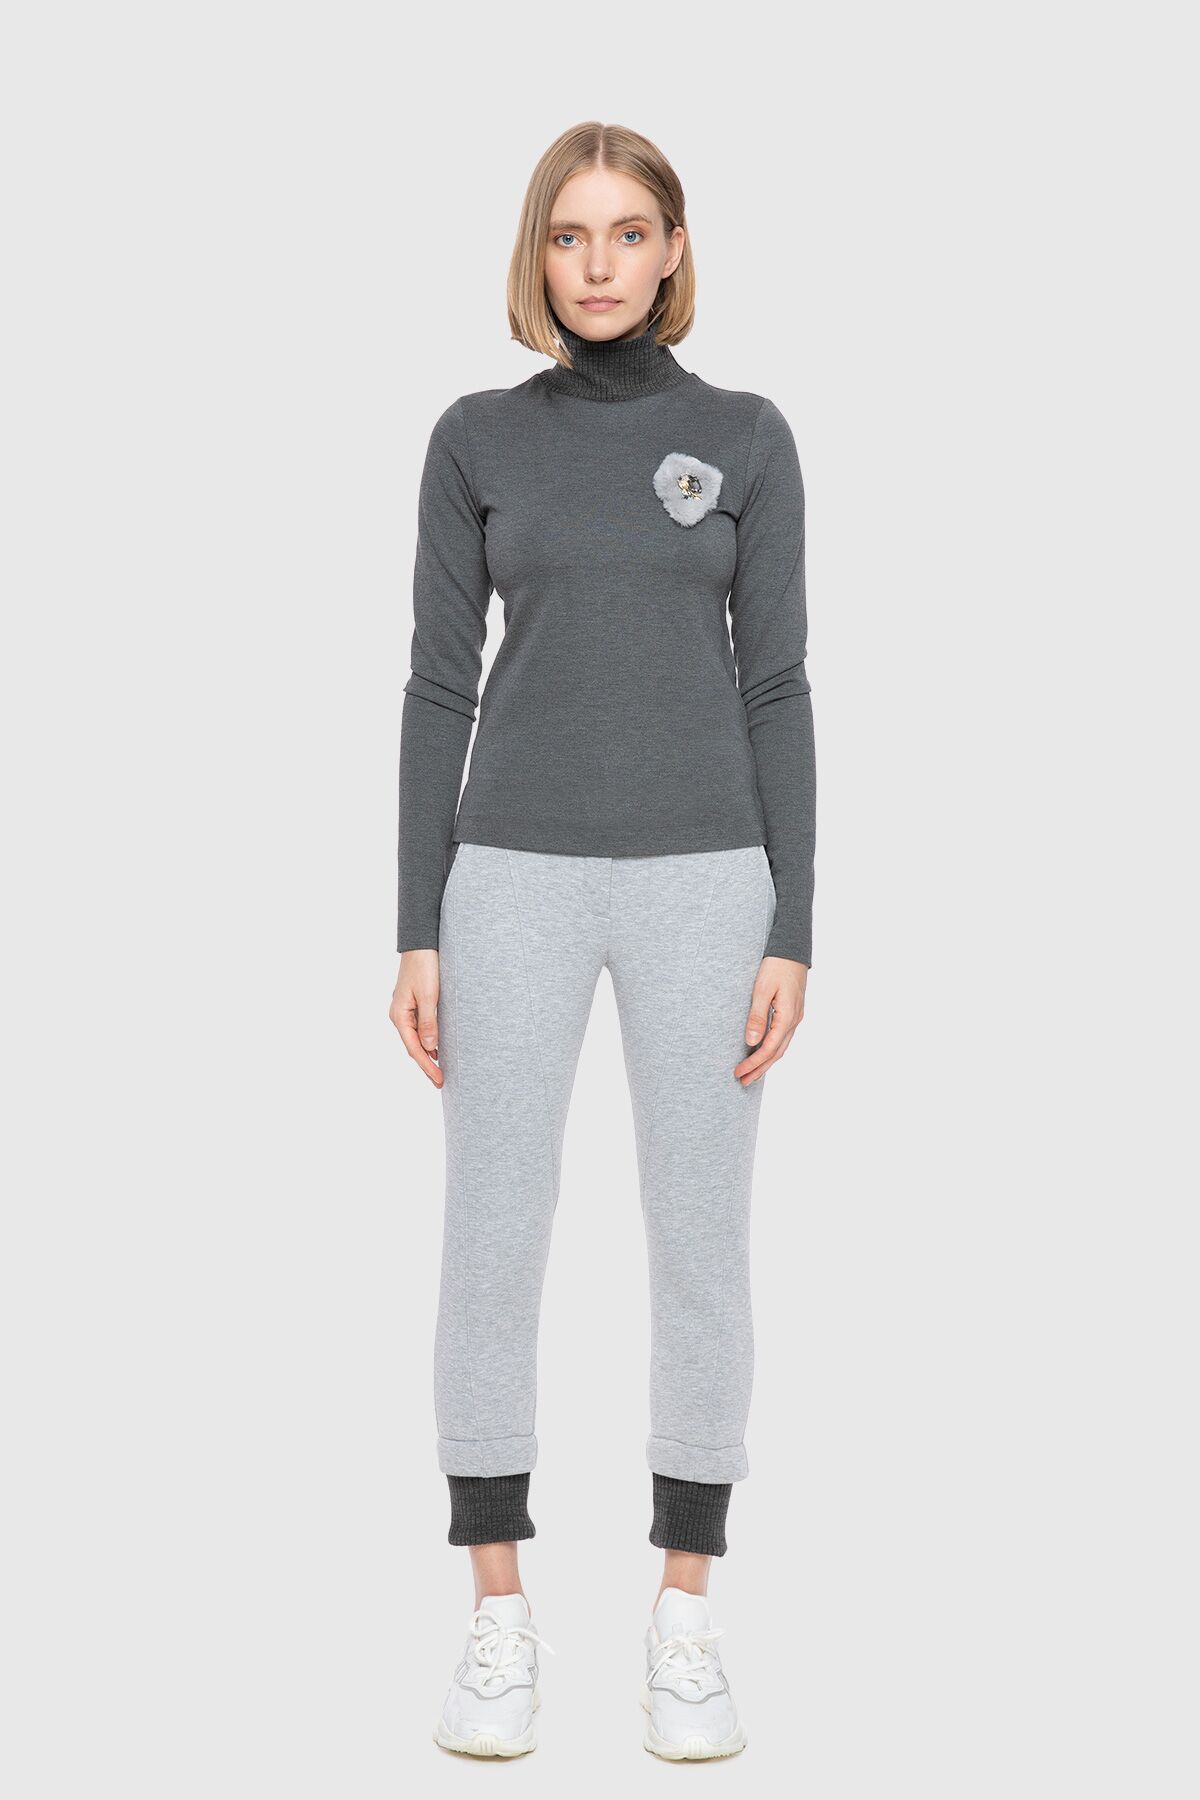 GIZIA SPORT - Knitwear Turtleneck Detailed Embroidered Gray Top